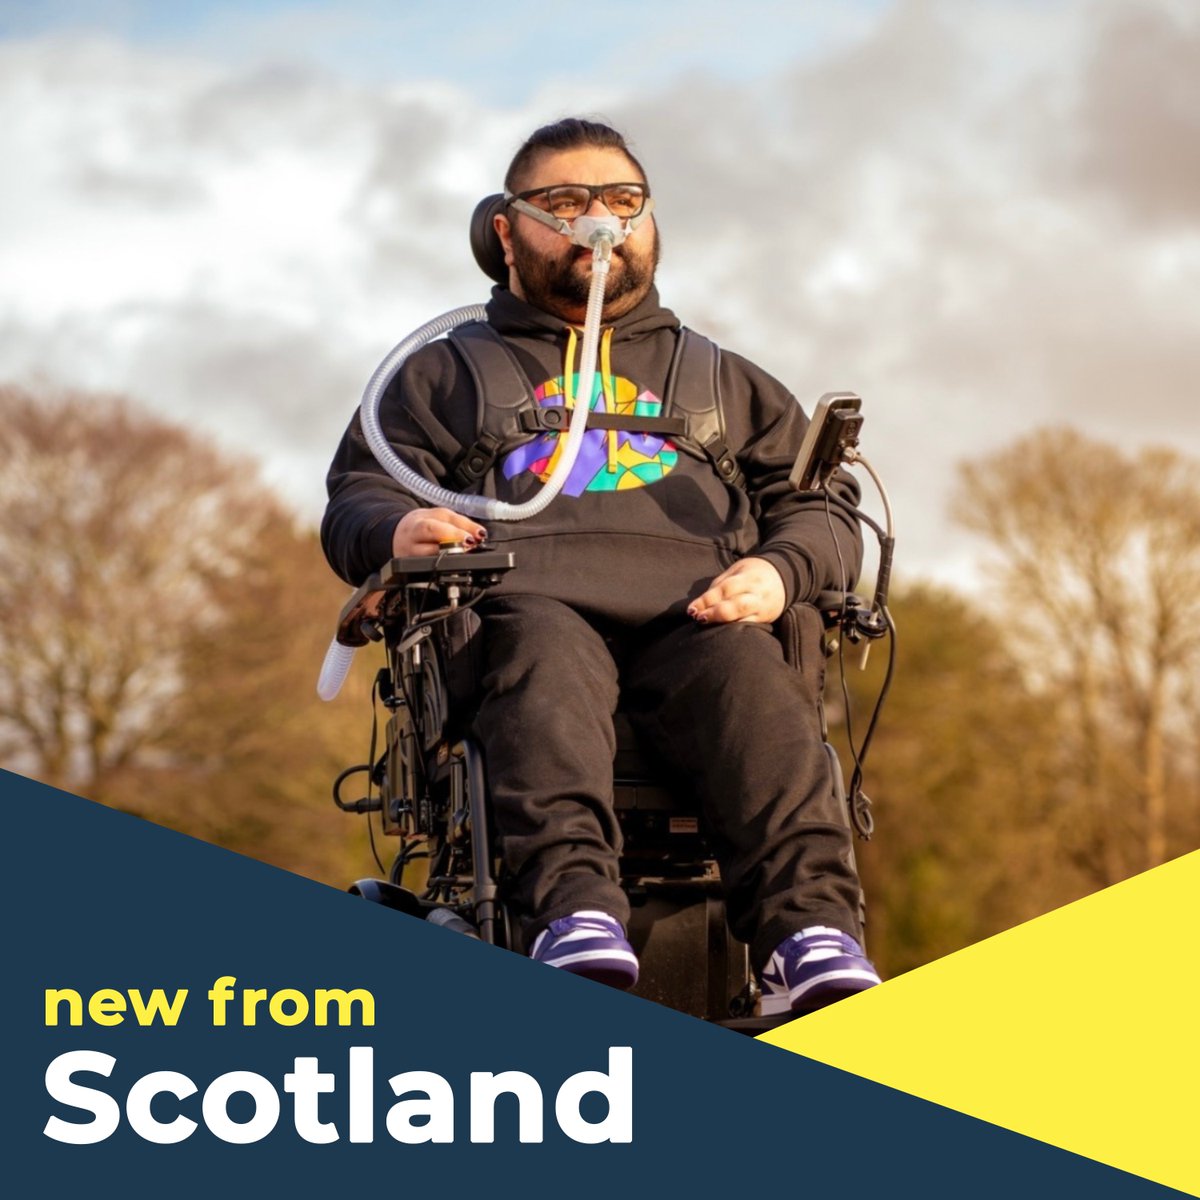 Happy Friday! Our New From Scotland playlist has just been updated with the latest releases from across Scotland! Check out new releases from @asksupermann, @redolentband, @loraysmusic, @joshua_grantt, @siightsofficial, @waltdisco and more! Listen now 👉 wide.ink/NewScot